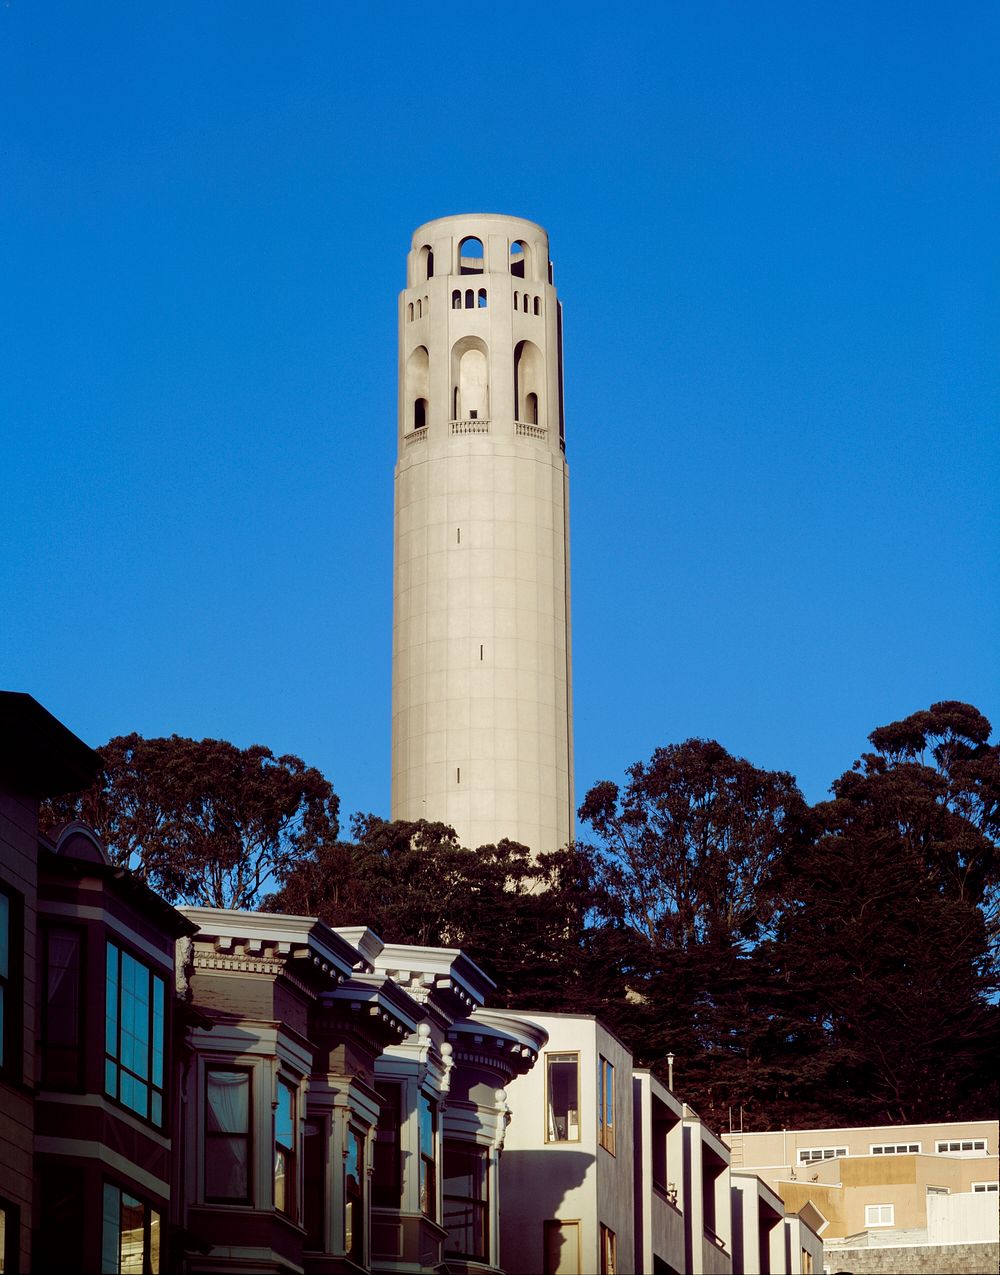 A detail of Coit Tower.